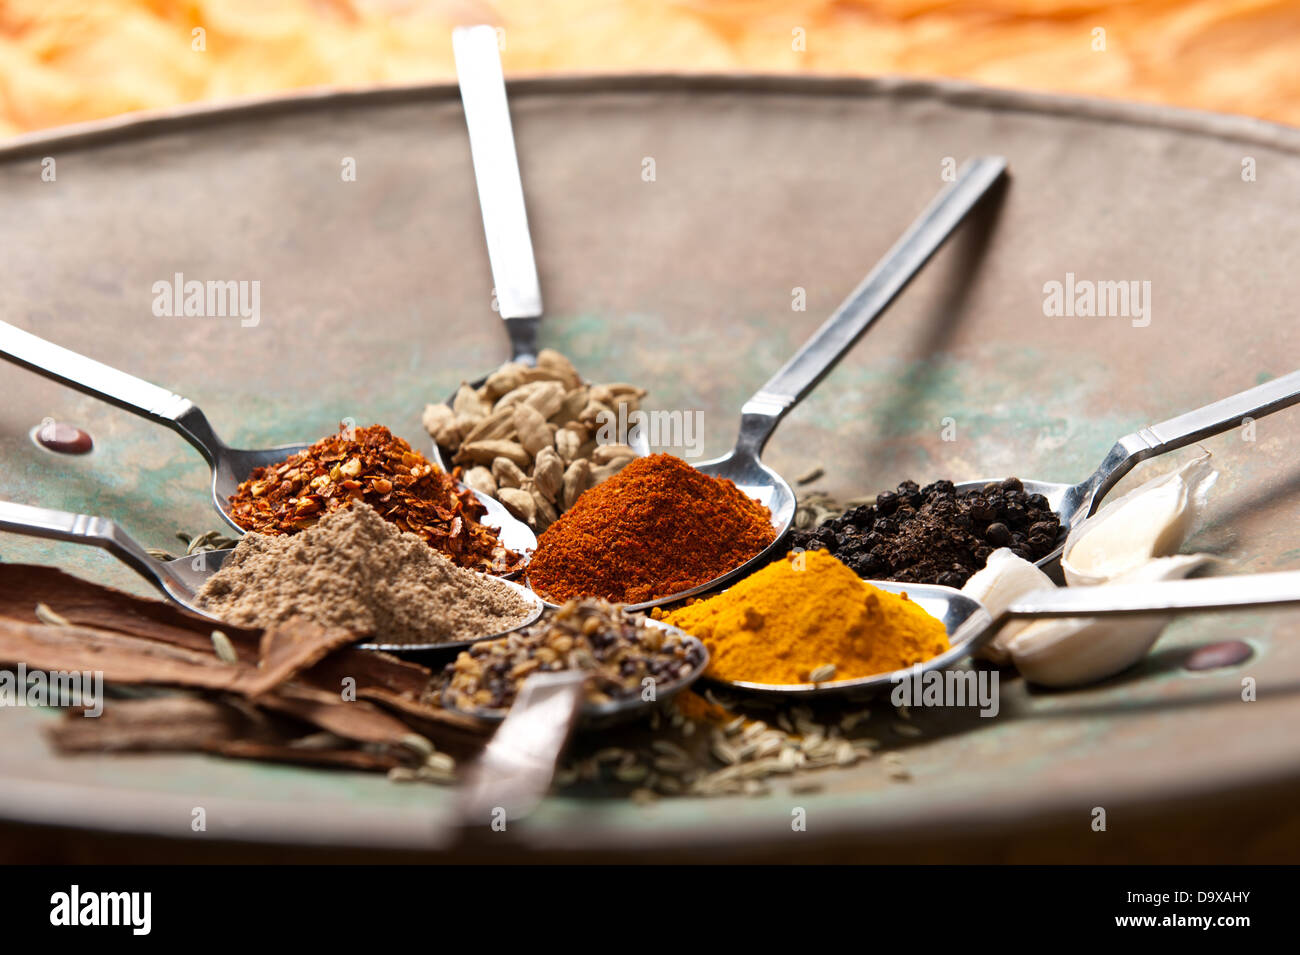 7 Table spoons arranged with different spices in a round Indian dish. Stock Photo